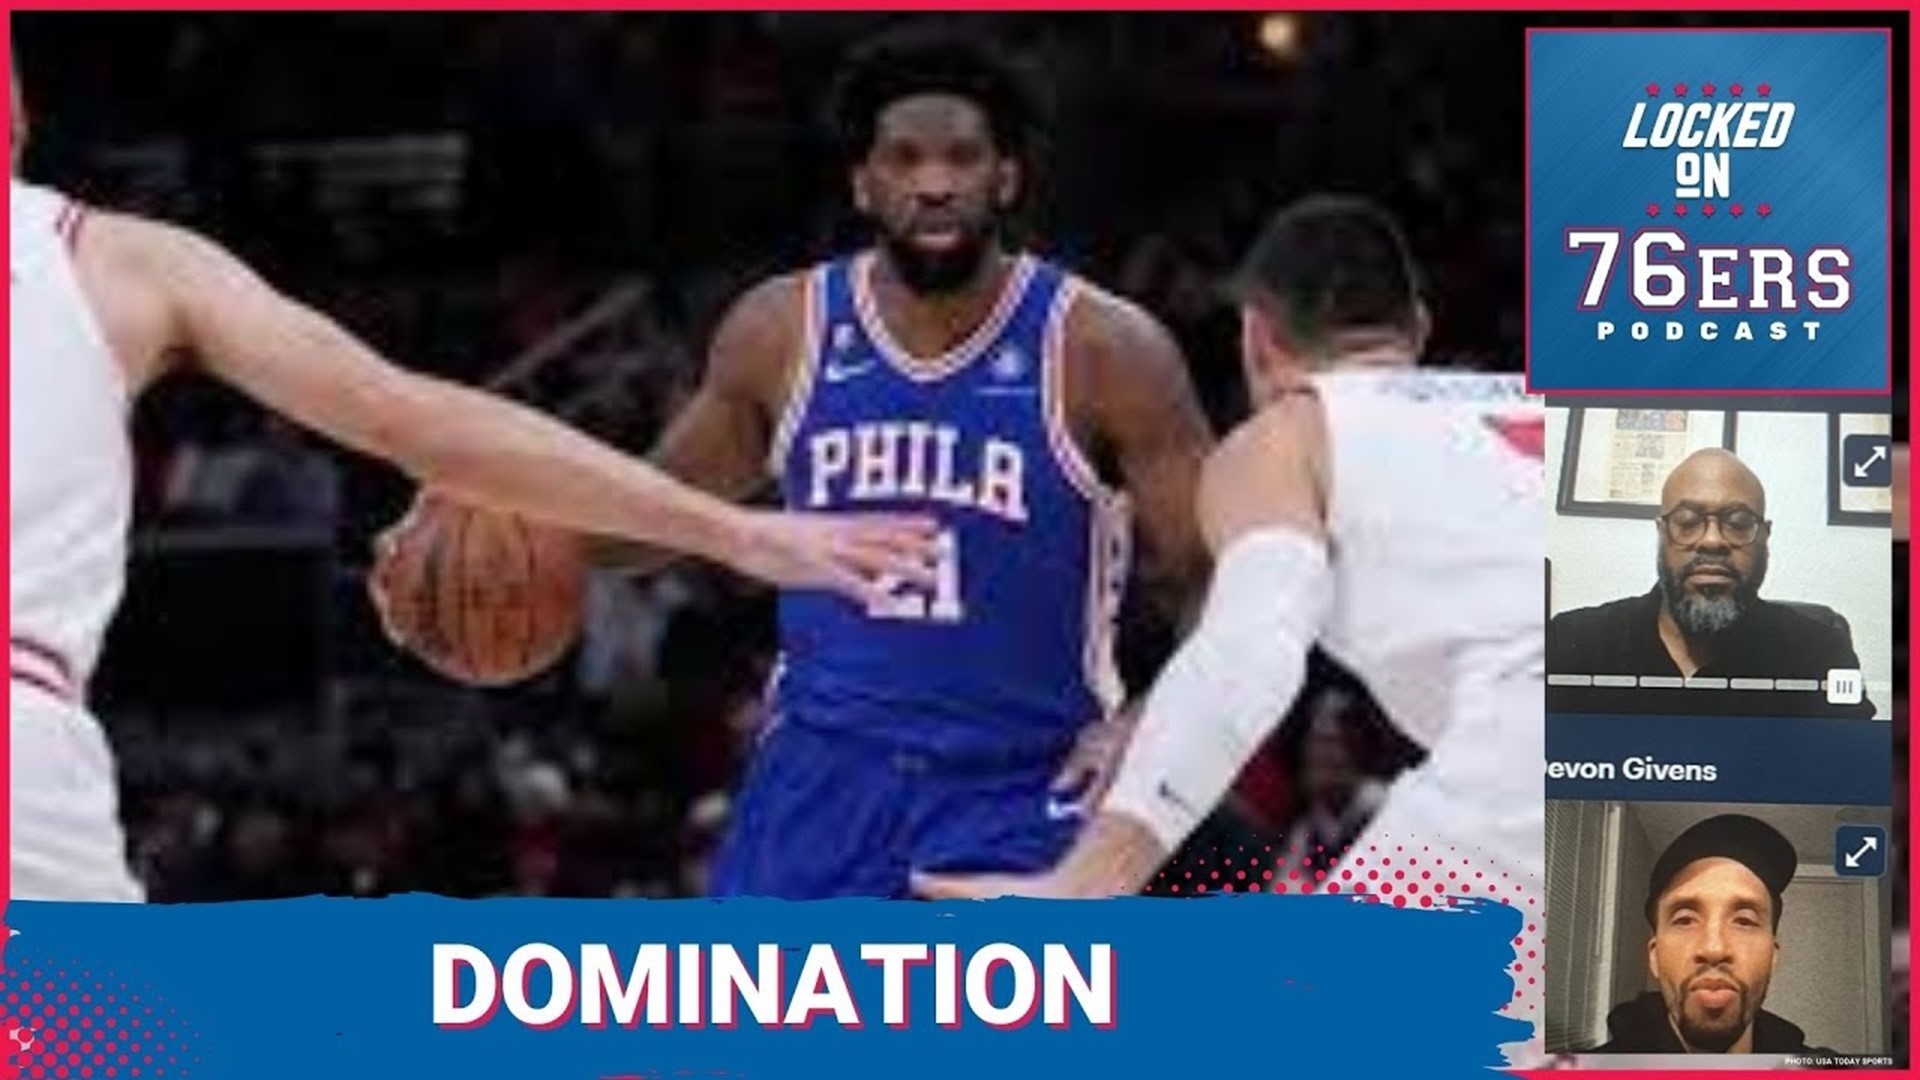 The 76ers defeated the Chicago Bulls 116-91 in Wednesday night's game at United Center, but Joel Embiid didn't play in the second half due to calf tightness.